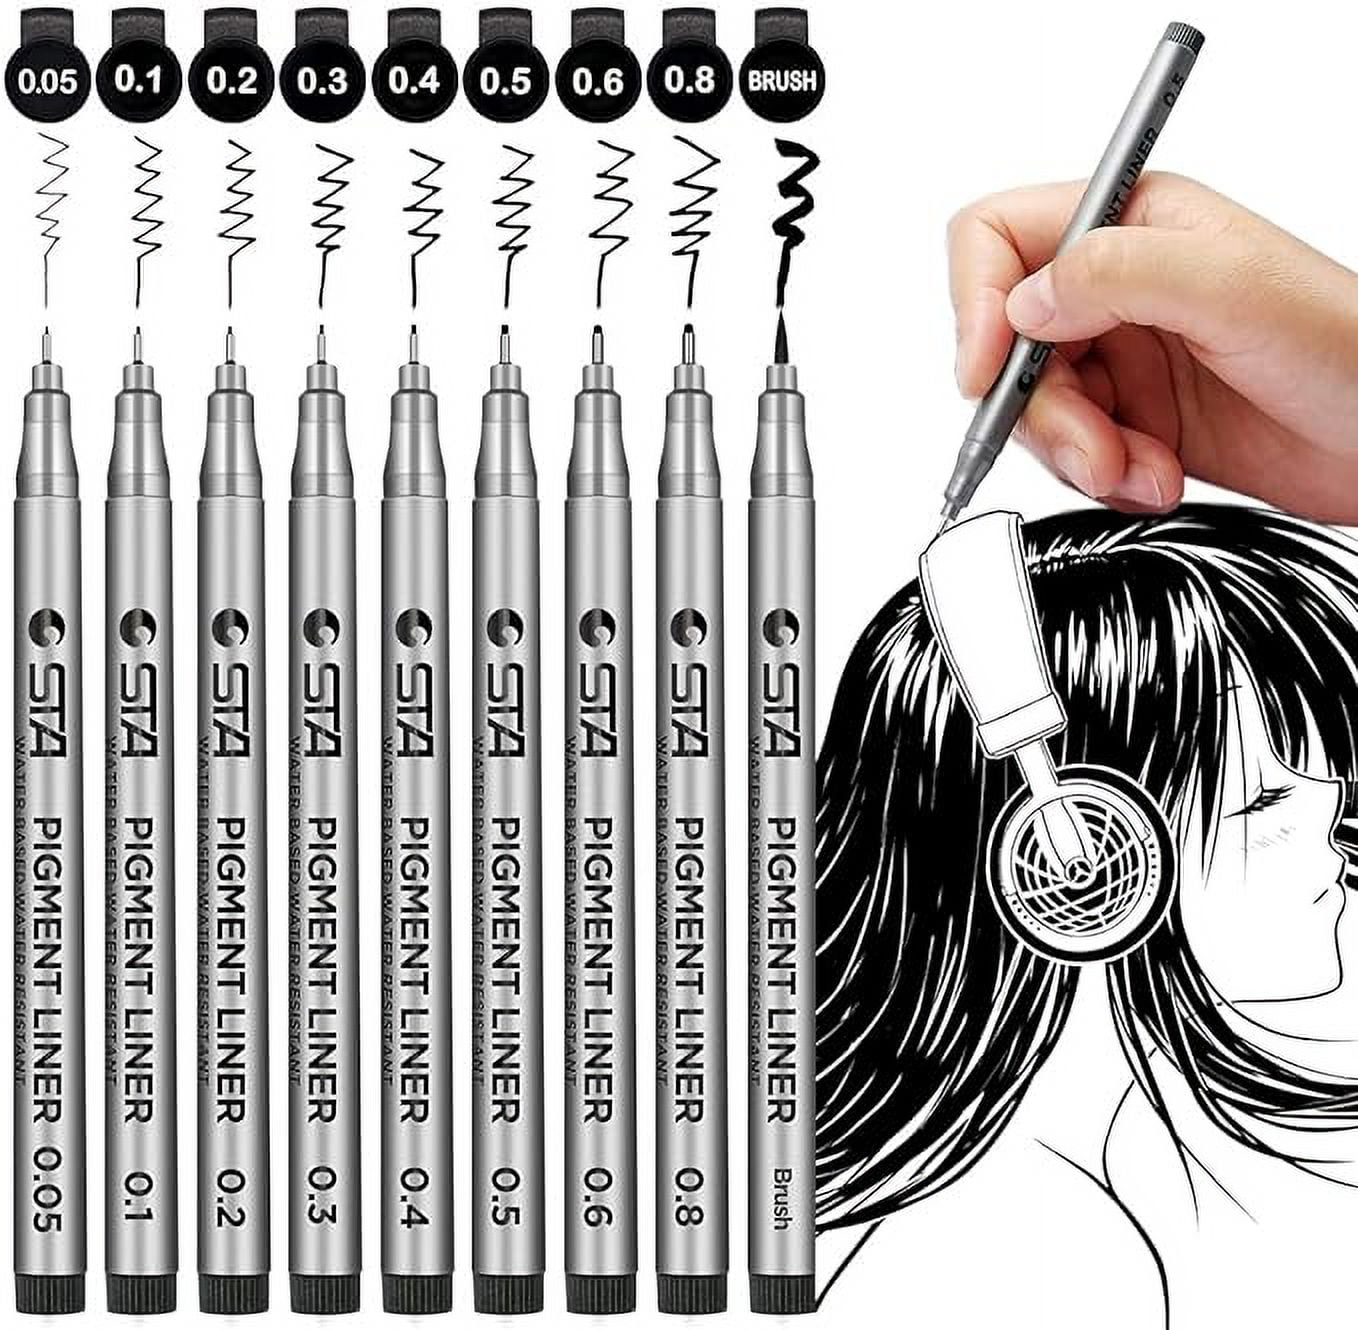  Ohuhu Micro Pen Fineliner Drawing Pens: 8 Sizes Fineliner Pens  Pigment Black Ink Assorted Point Sizes Waterproof for Writing Drawing  Journaling Sketching Anime Manga Watercolor for Artists Beginners : Arts,  Crafts